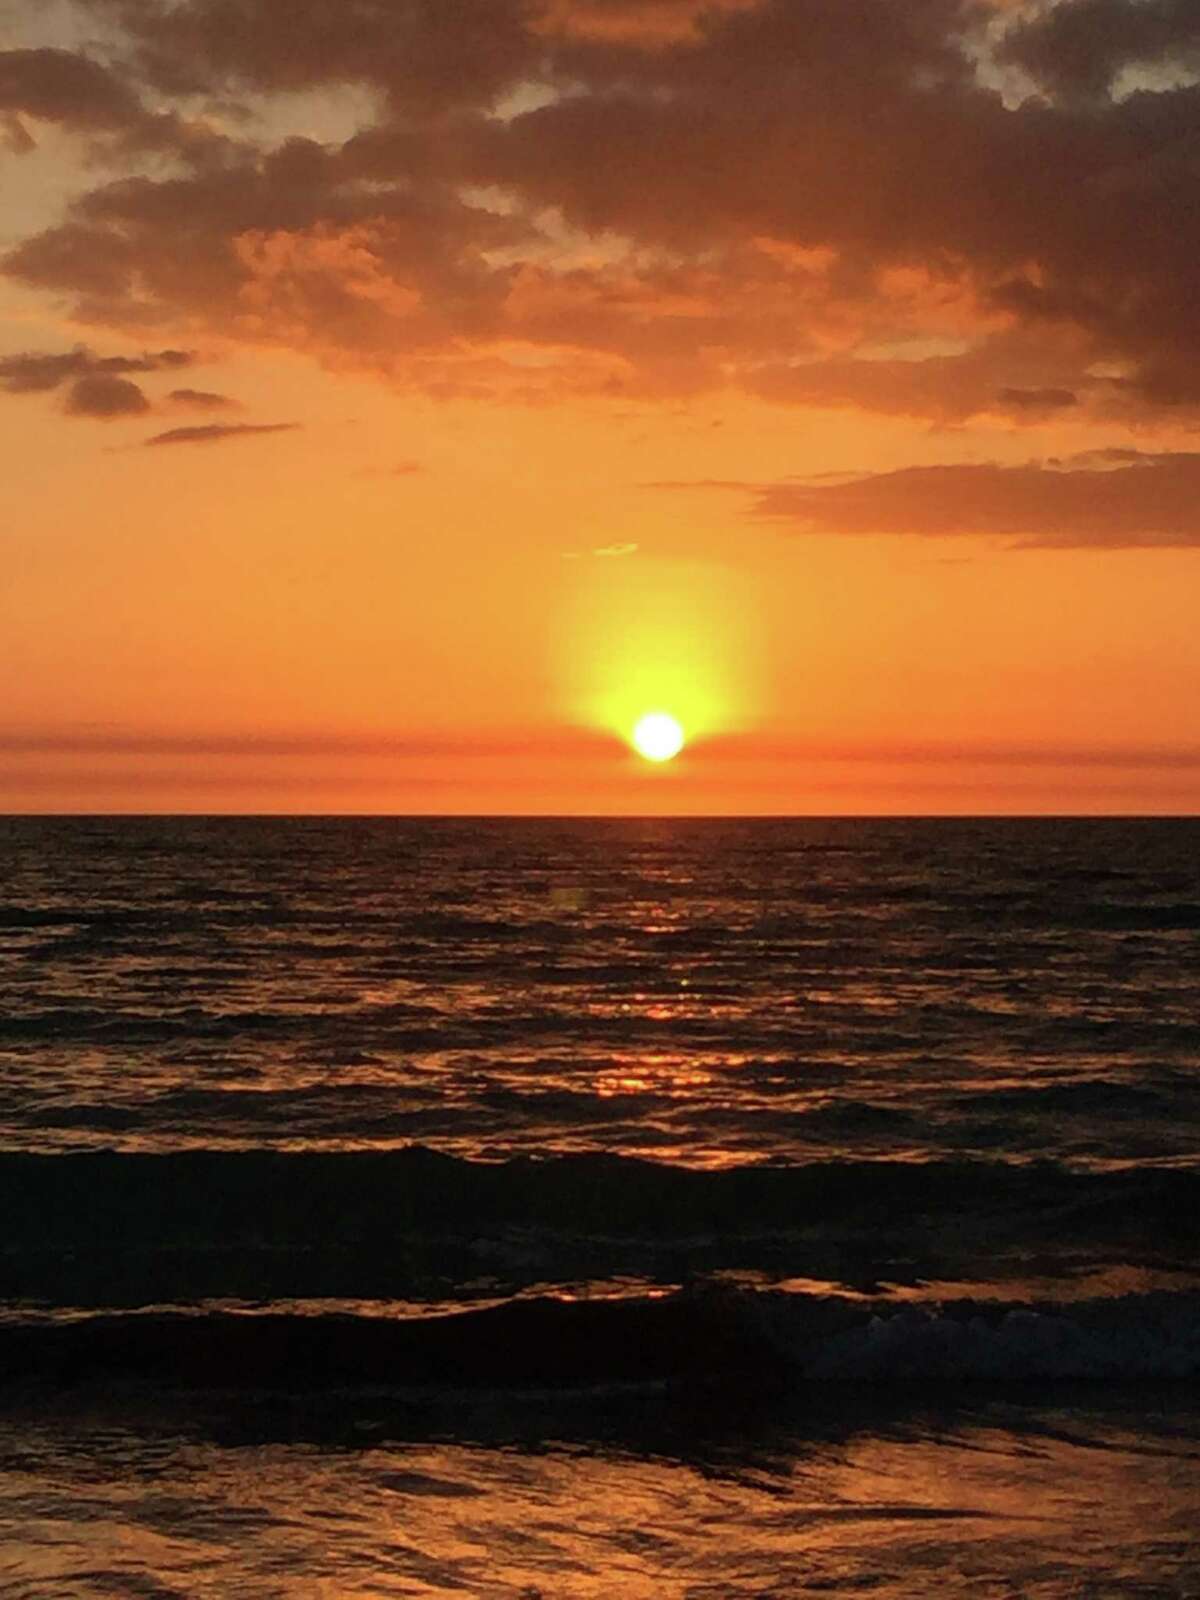 Janice and Jim Tibbitts of Loudonville were on vacation in Sarasota, Fla., on March 29 and got the sun coming up Siesta Key Beach